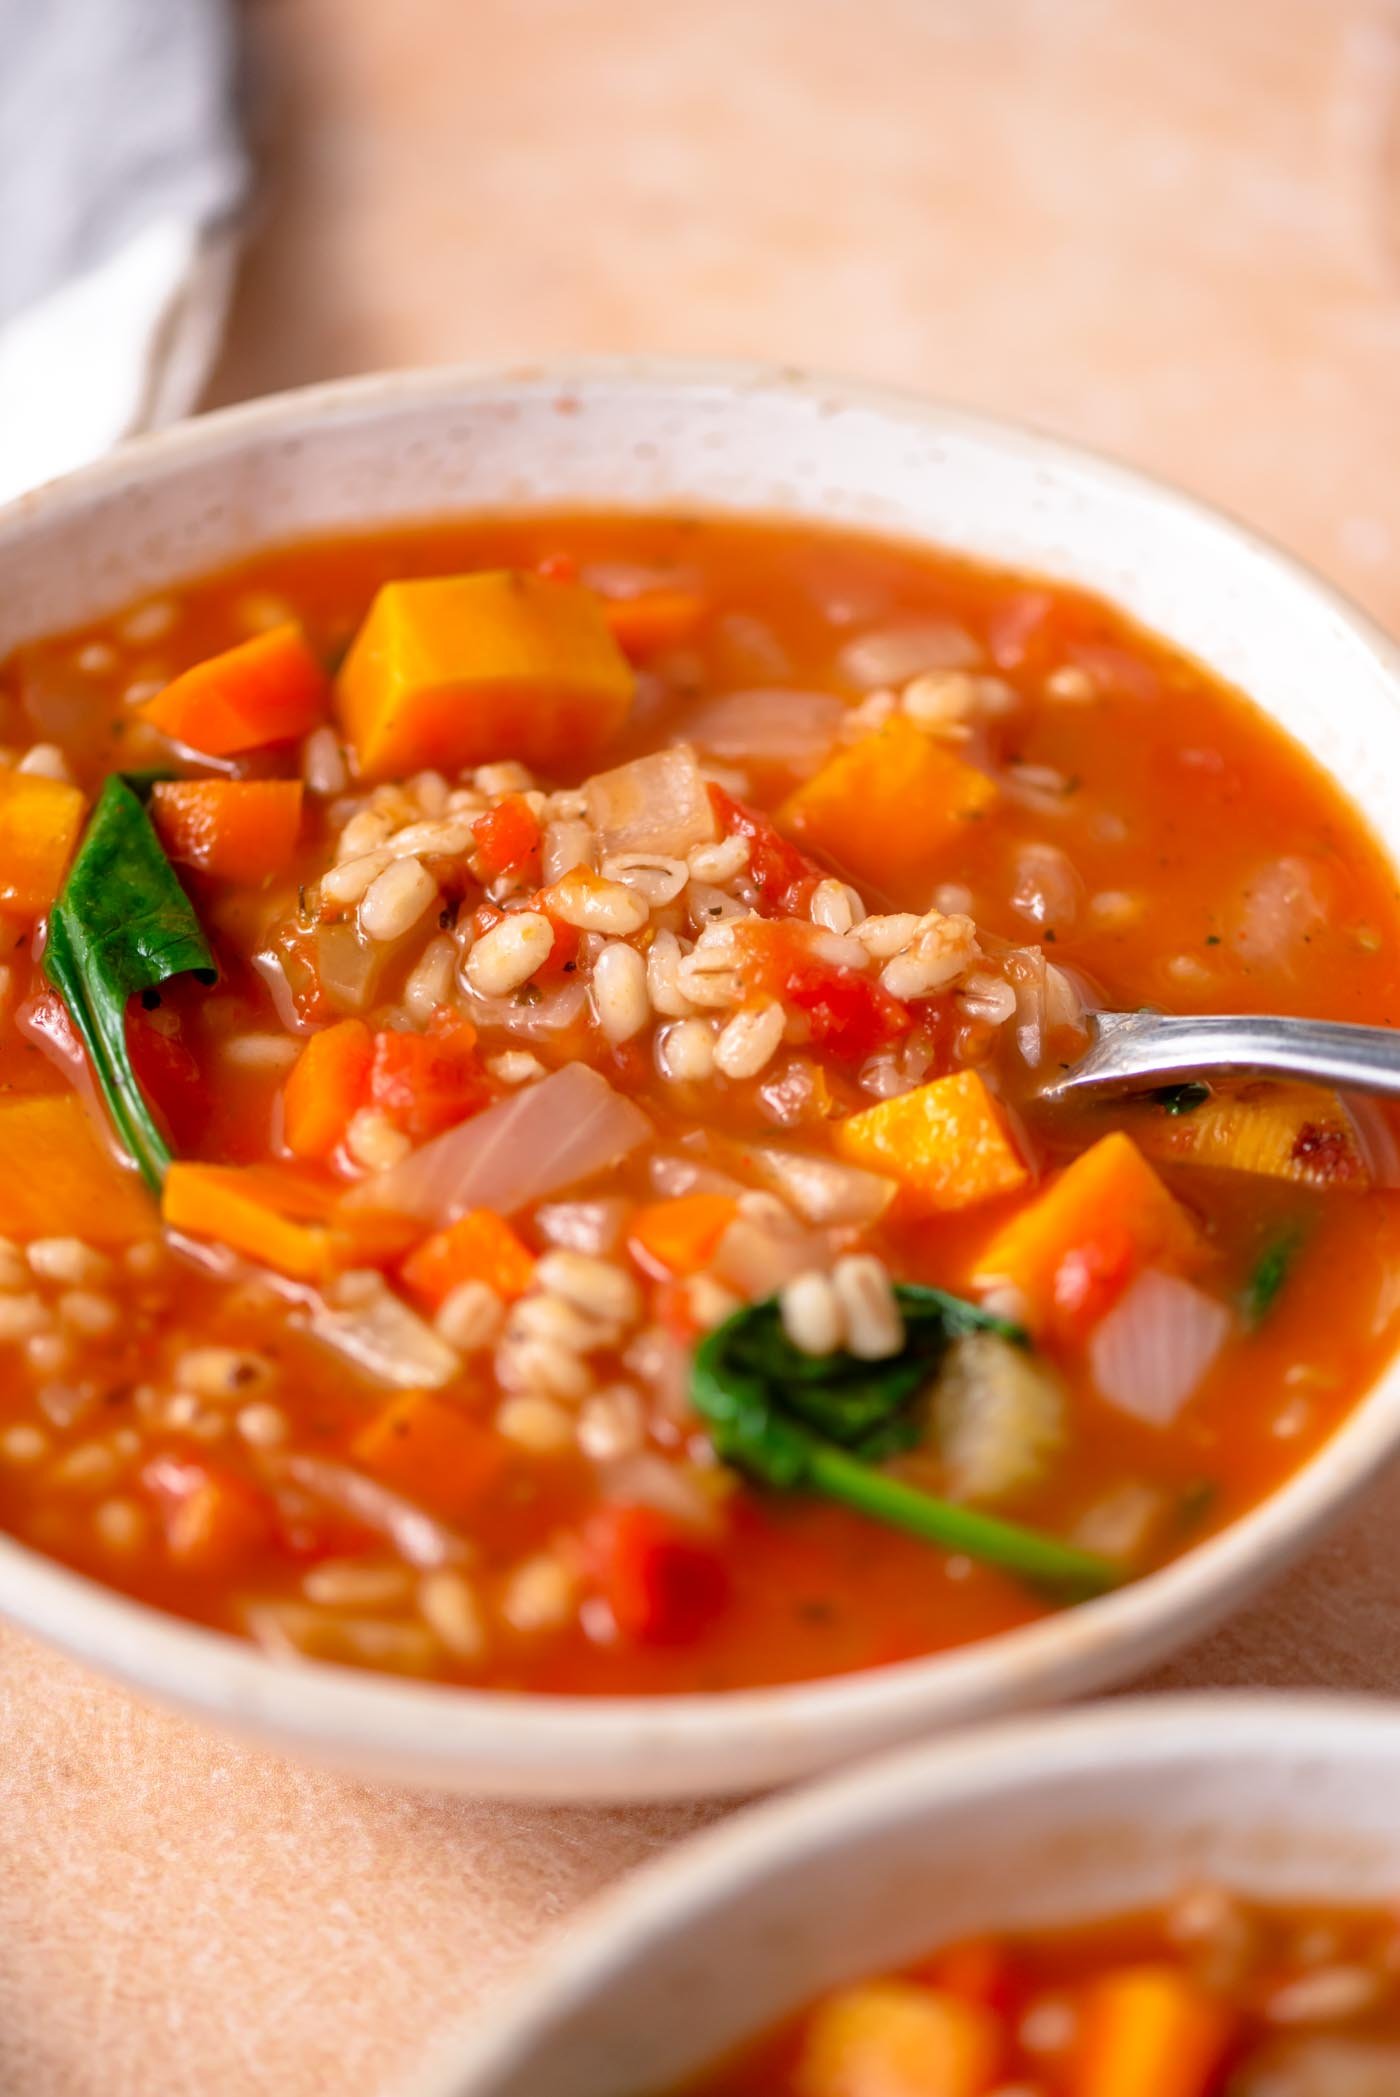 Spoon in a bowl of vegetable barley soup with sweet potato and spinach.